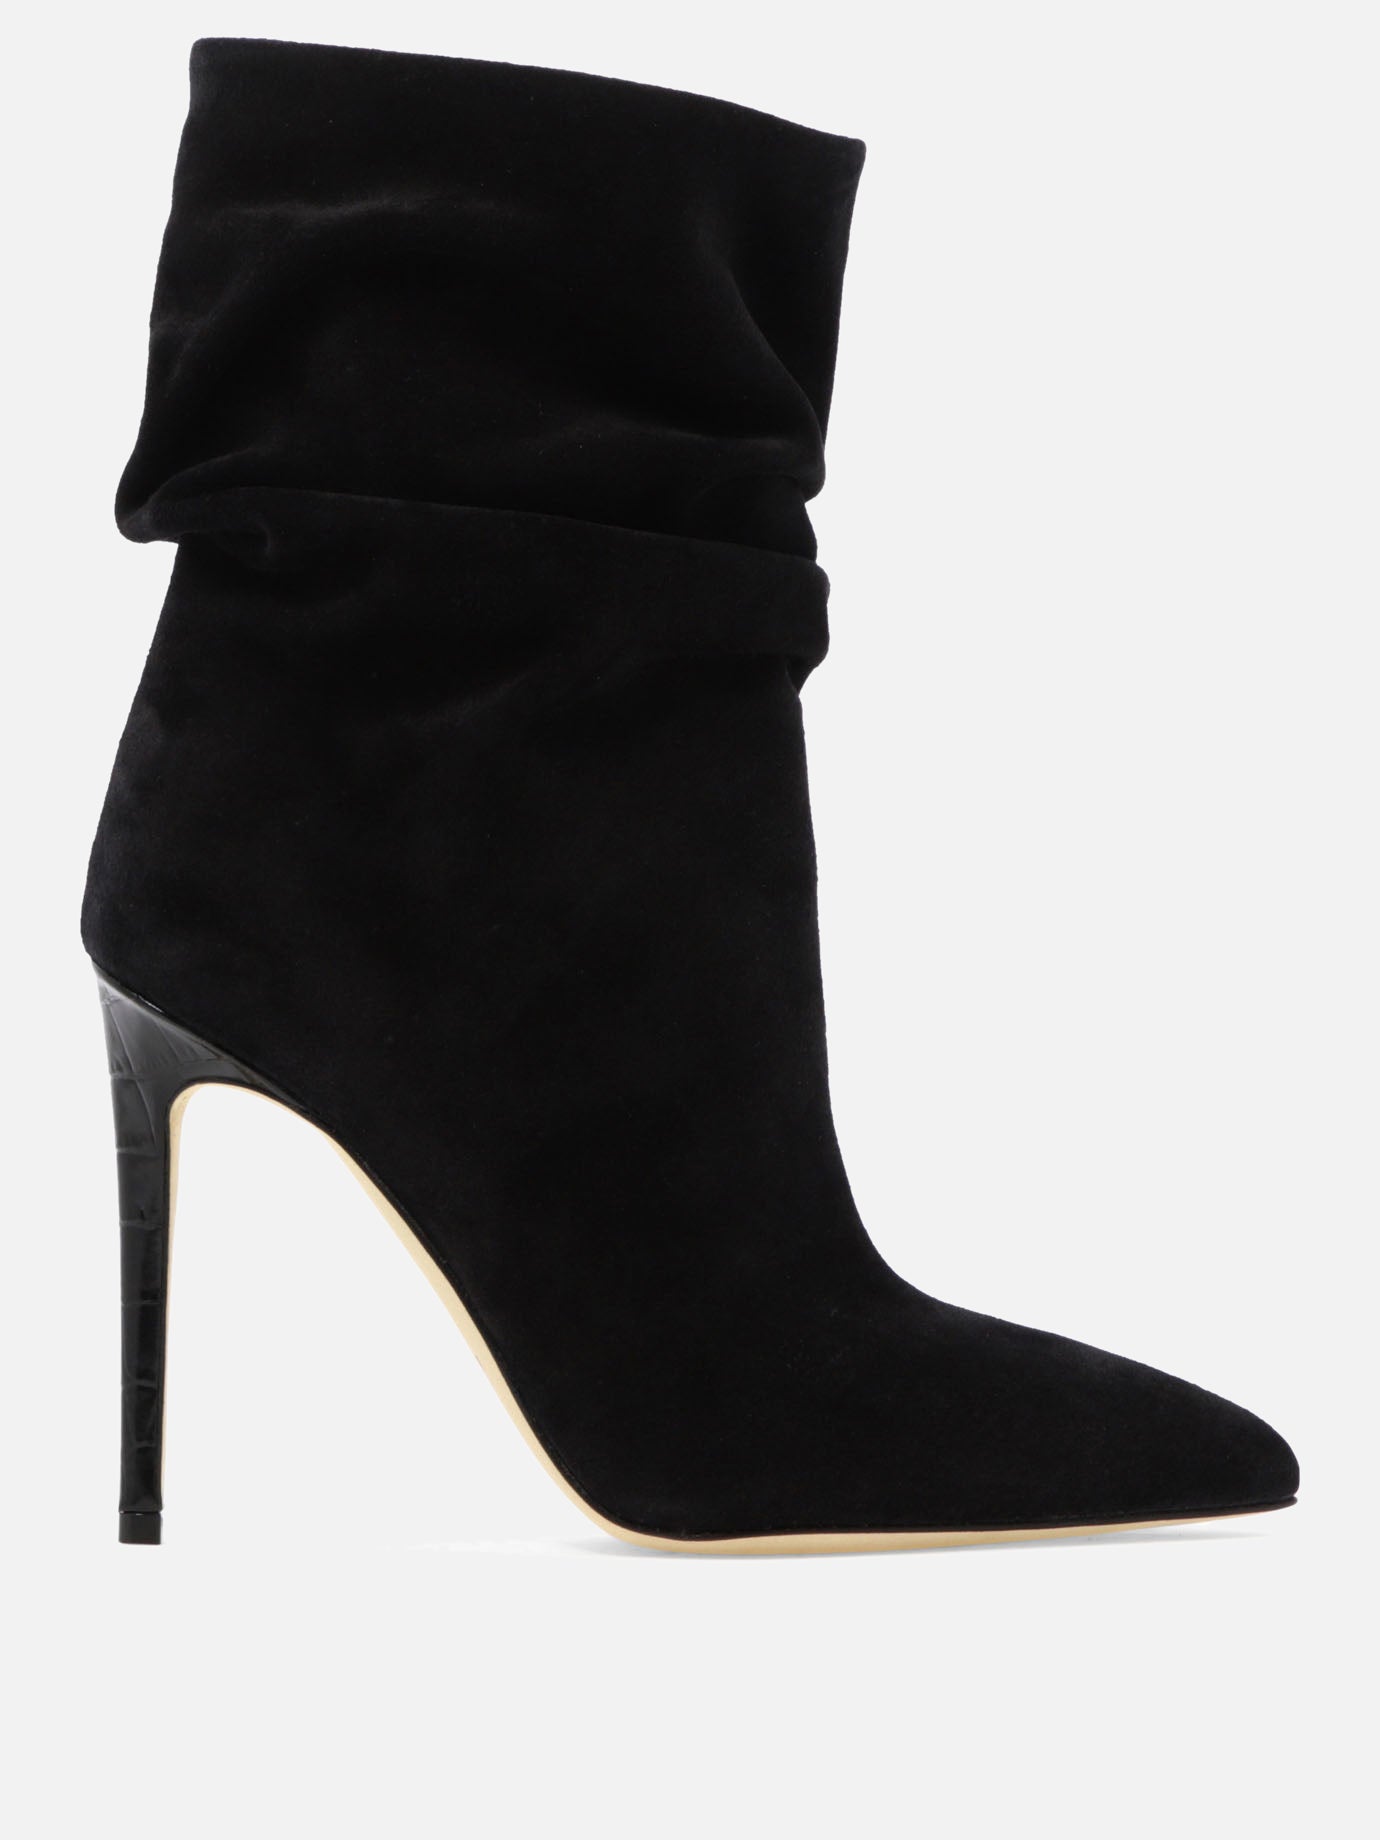 "Slouchy" ankle boots